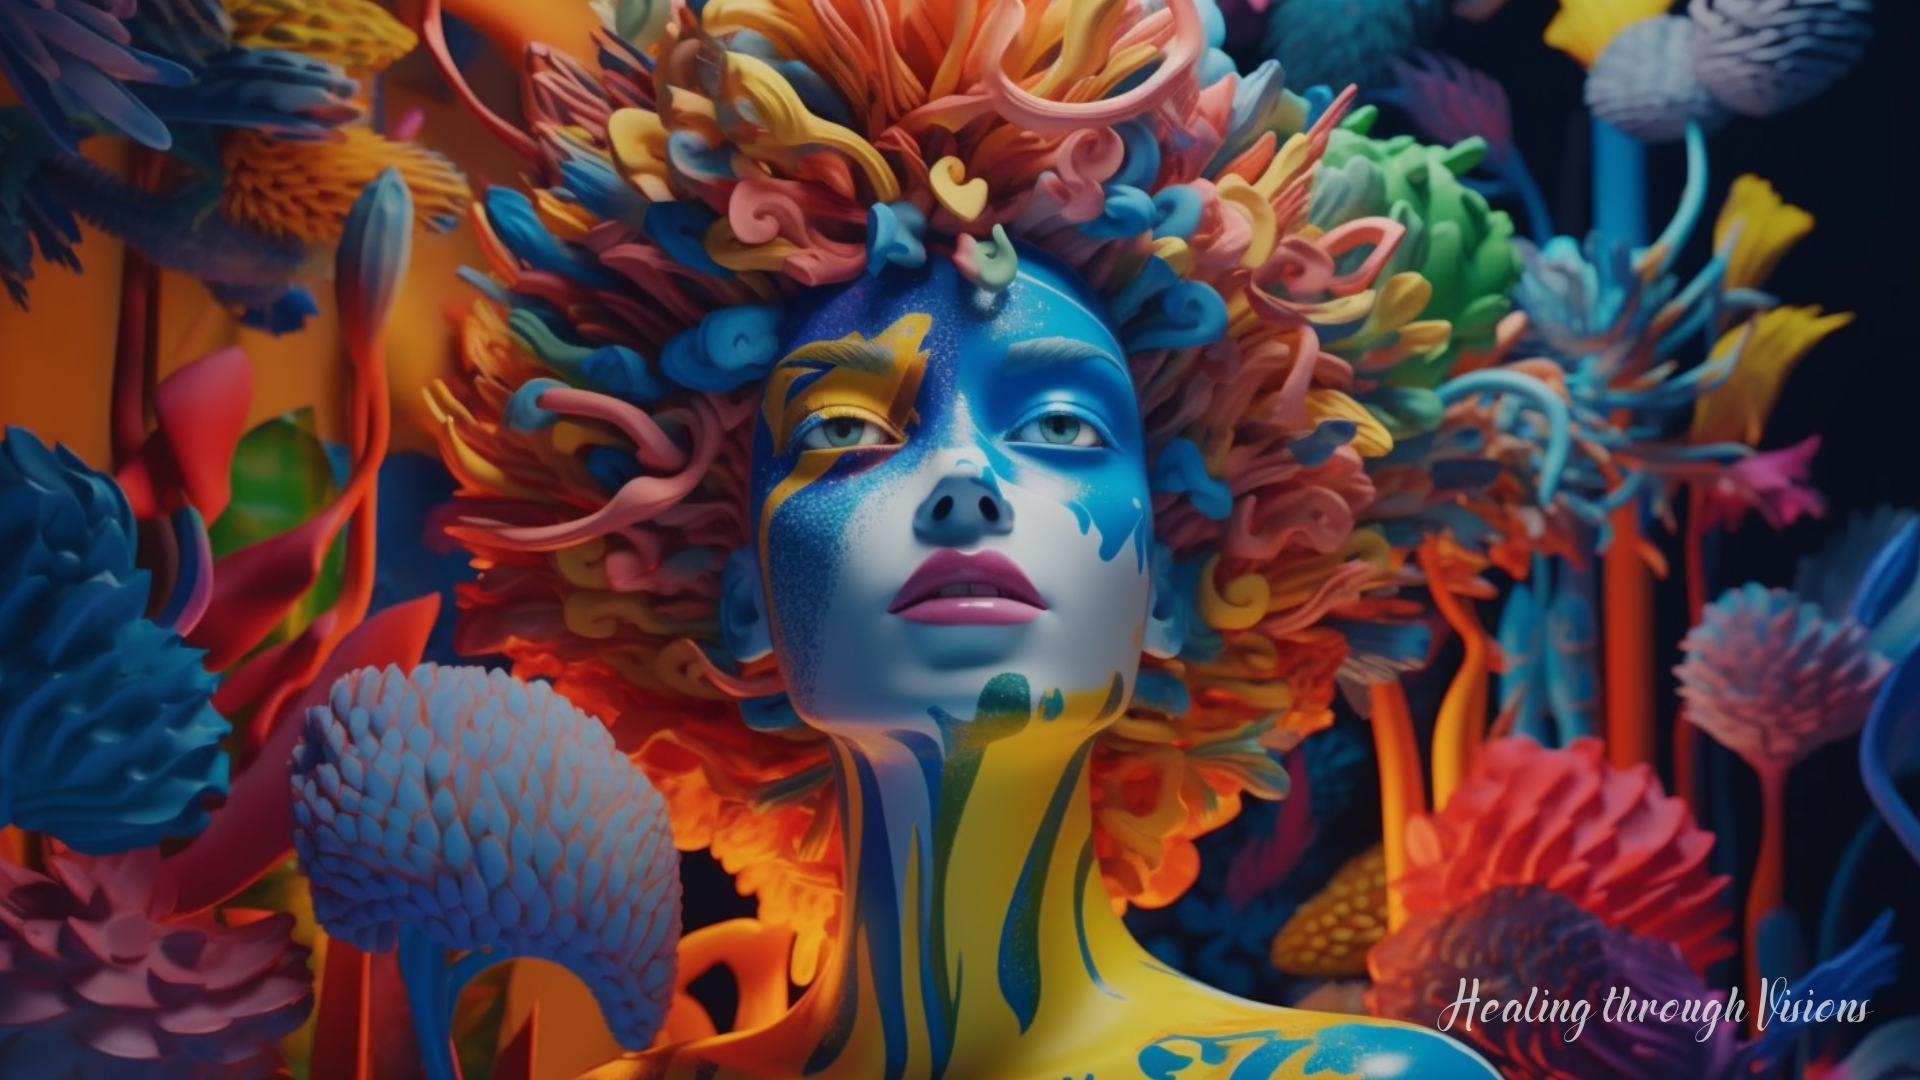 Vivid, magical, vibrant, surreal, Pablo Picasso-esque depiction of alternate realities. A blue humanoid being with hair strands of clay like colorful coils stands proudly as they are surrounded by a rainbow of vivid colors.